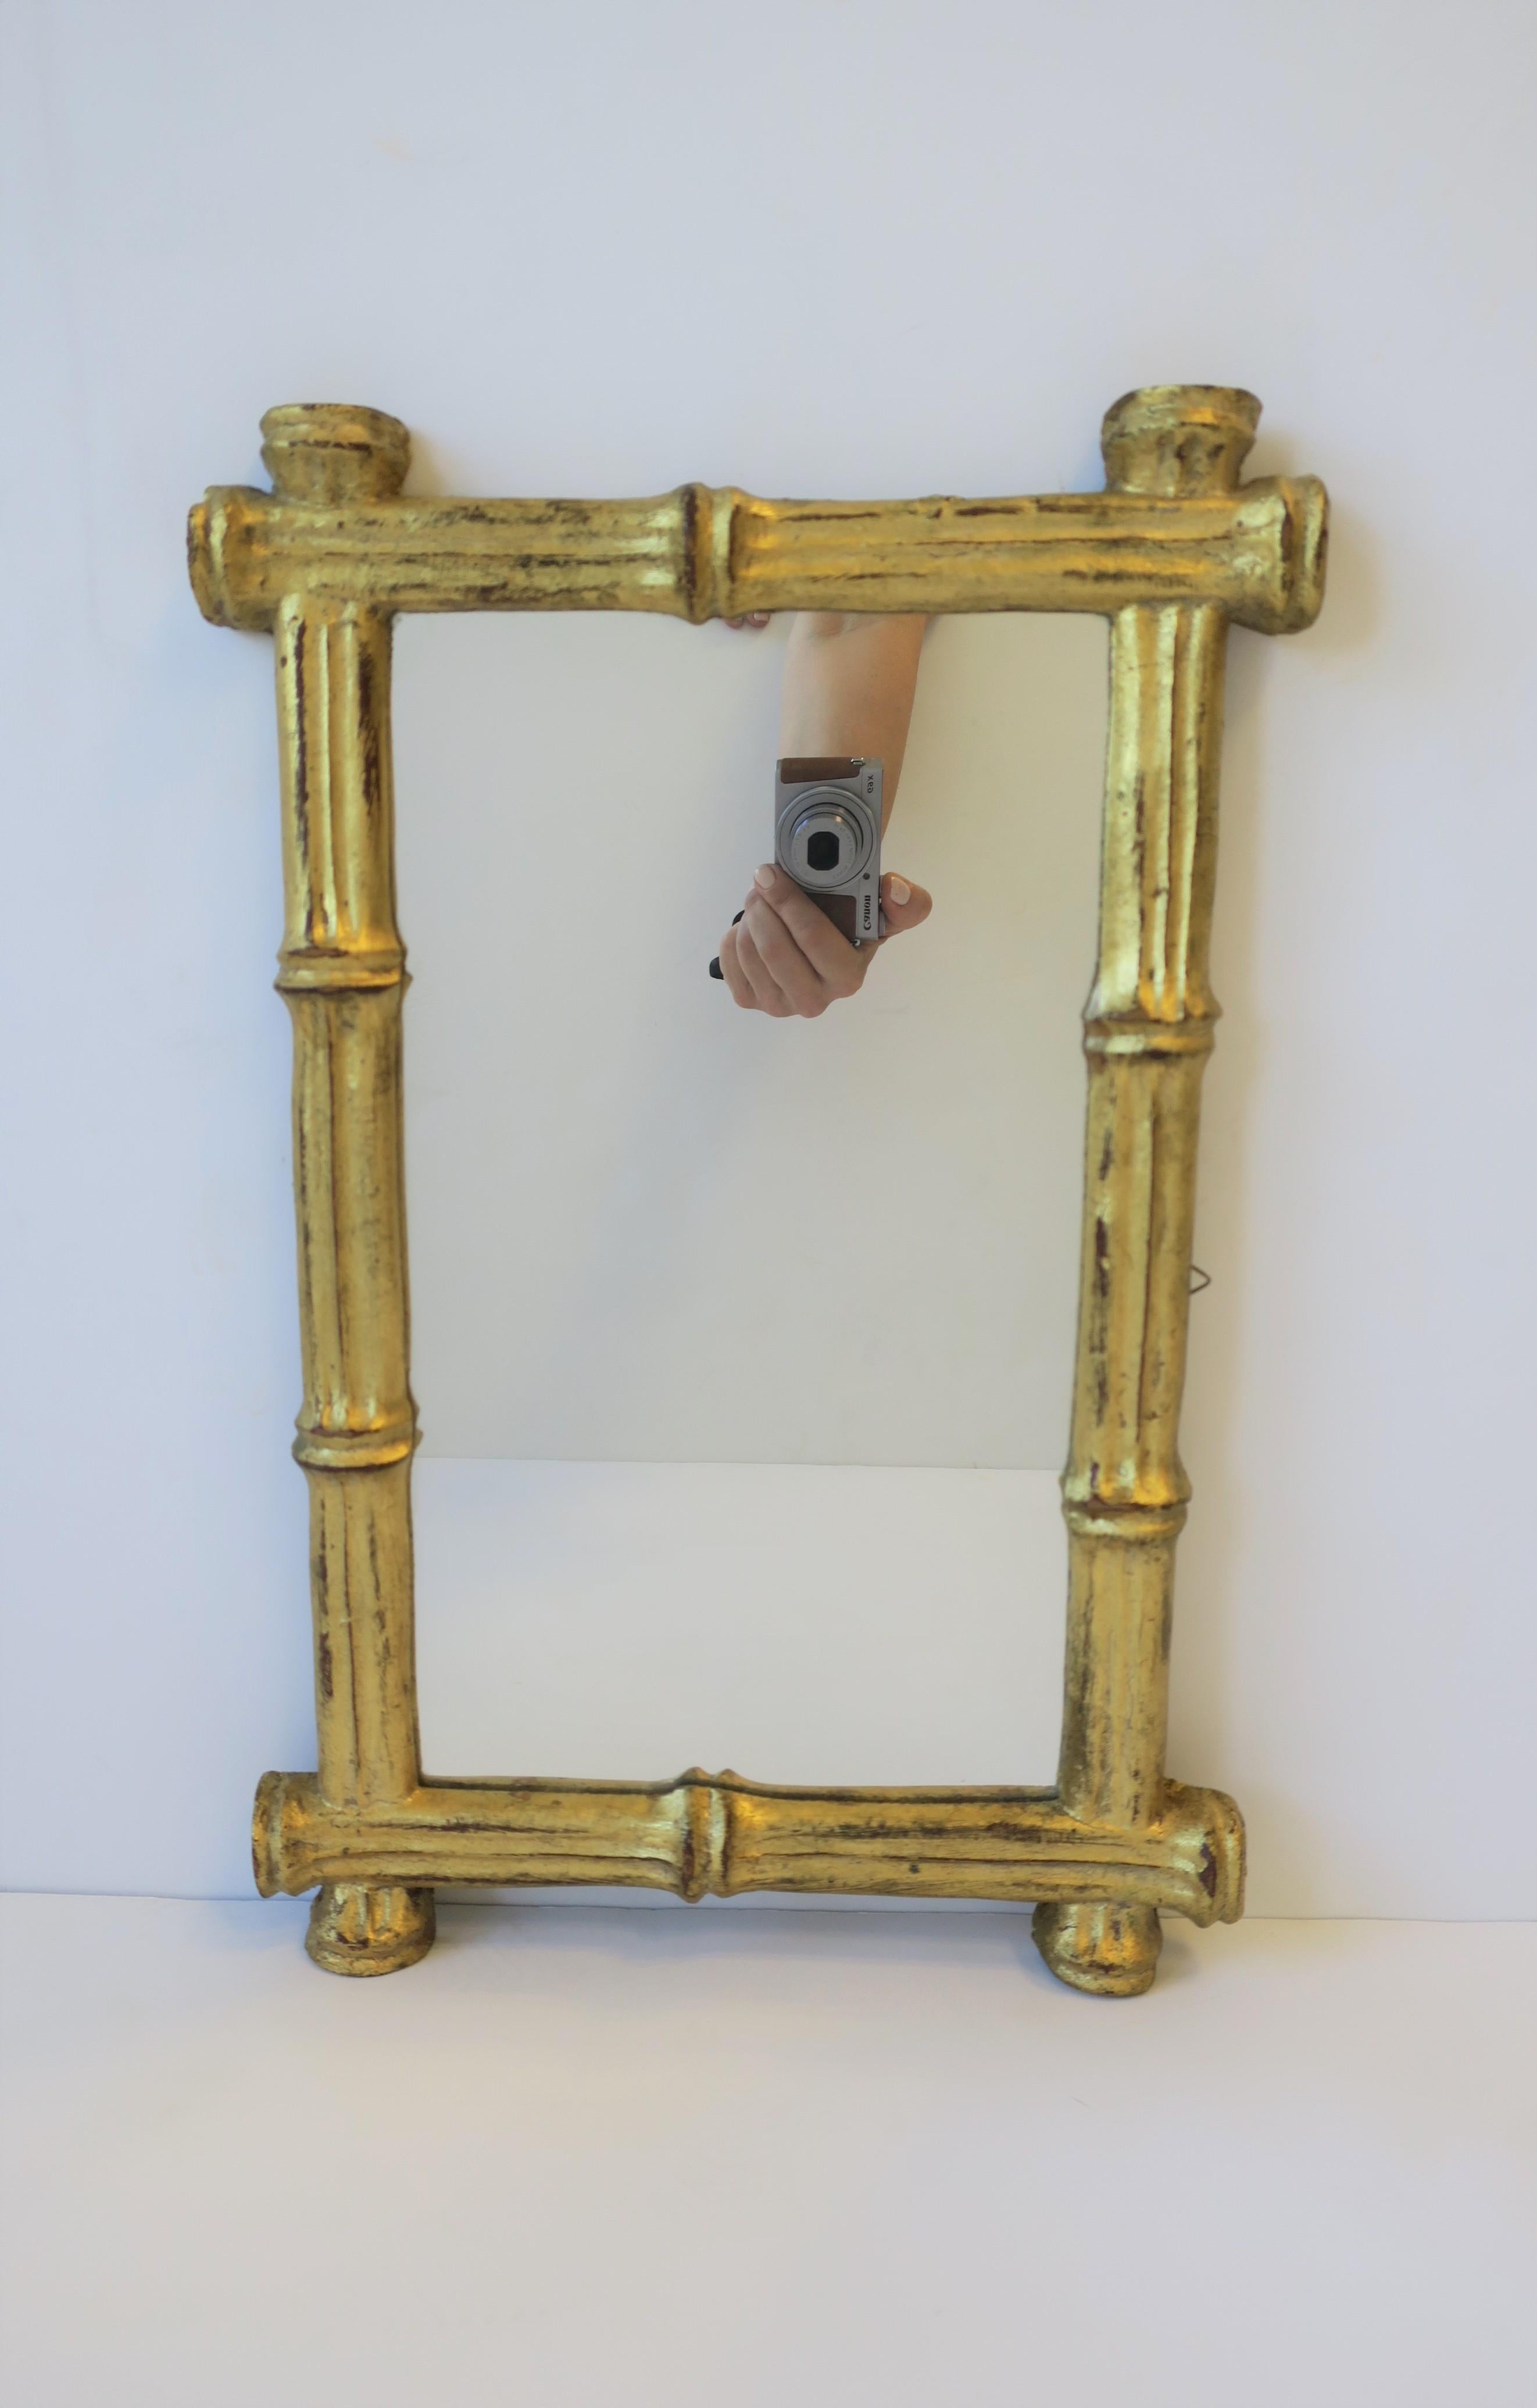 A beautiful small Mid-20th century Italian mirror with a gold giltwood frame in a 'bamboo' style, circa 1960s, Italy. 

Mirror can hand vertically or horizontally. With maker's mark on back and marked 